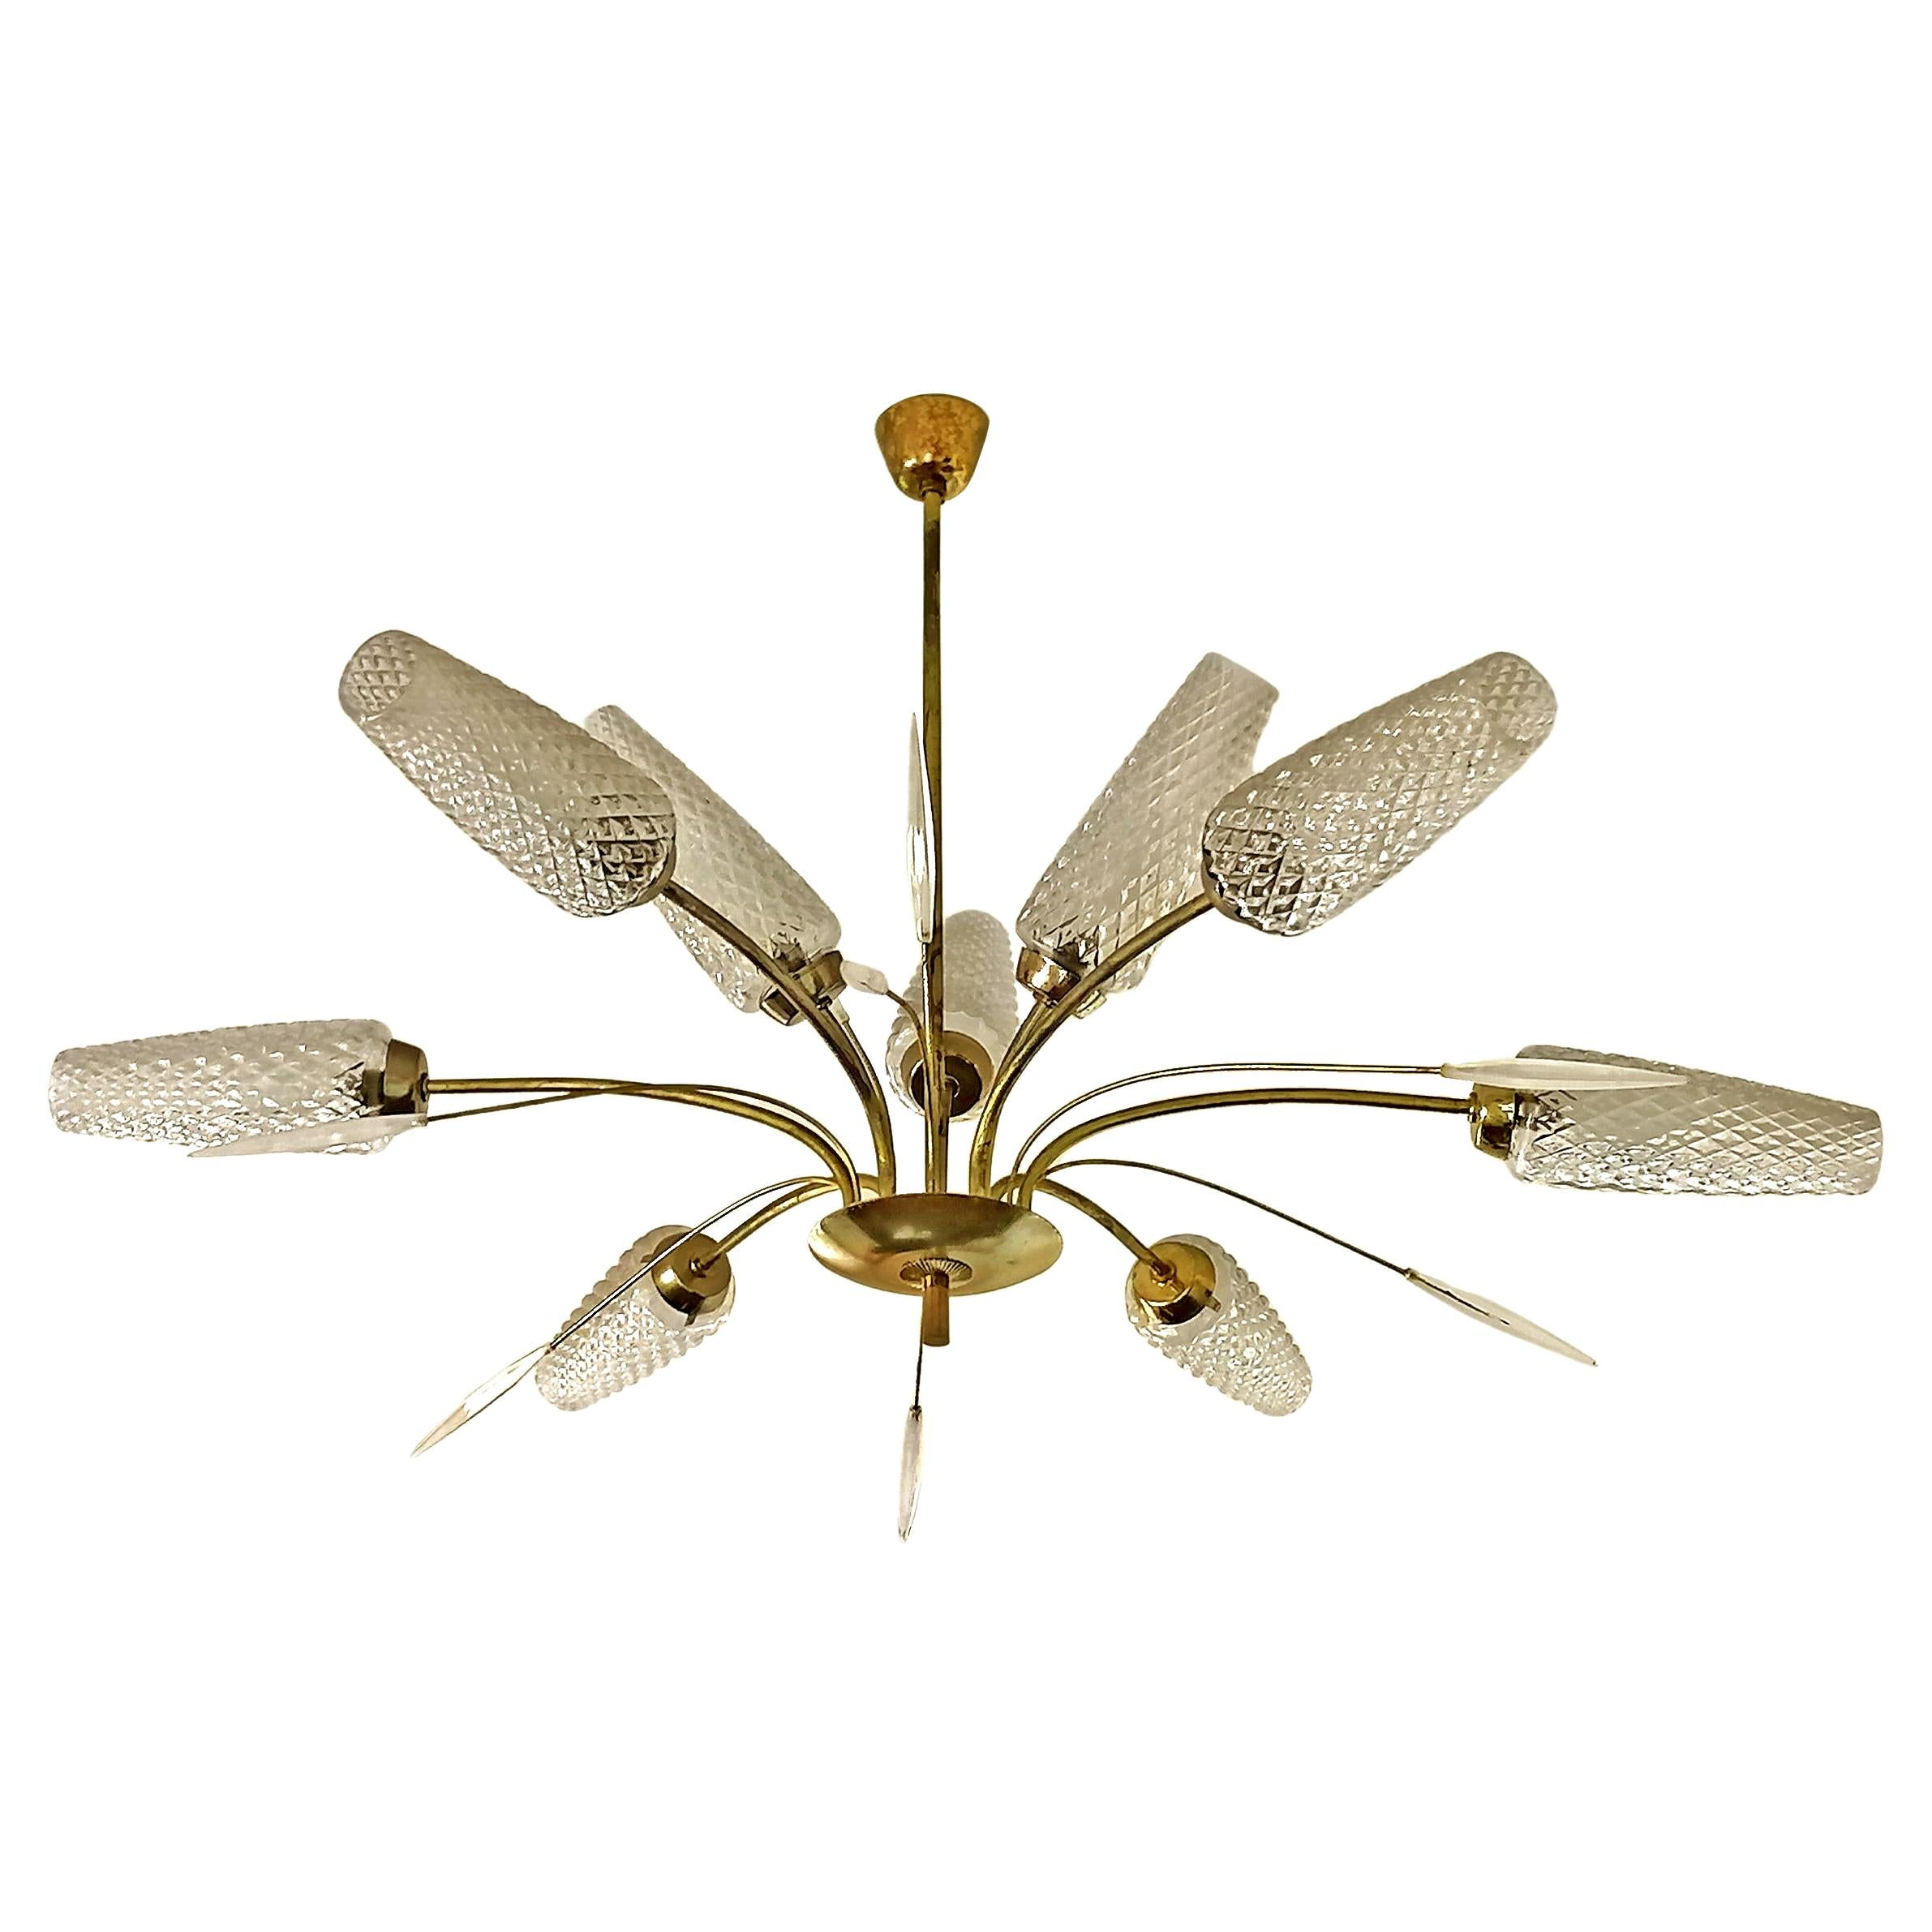 Large sculptural Mid-Century Modernist French Art Deco attributed to Maison Lunel. Gilt brass, metal and white Lucite Sputnik chandelier with 9 light/ circa 1950, Stilnovo Gio Ponti era. 